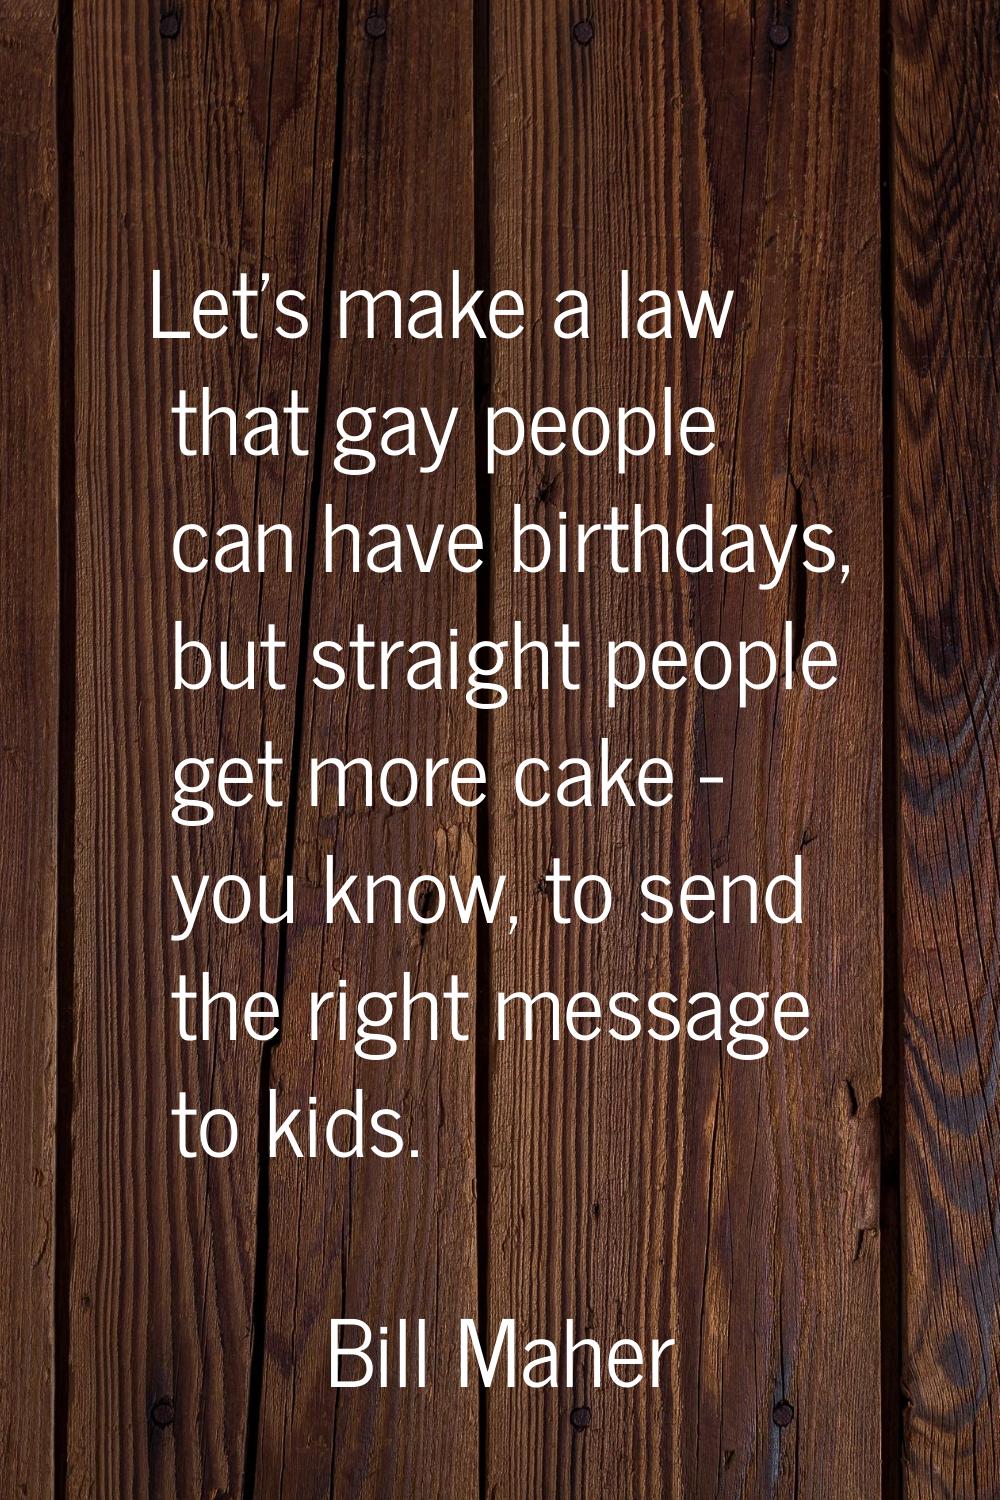 Let's make a law that gay people can have birthdays, but straight people get more cake - you know, 